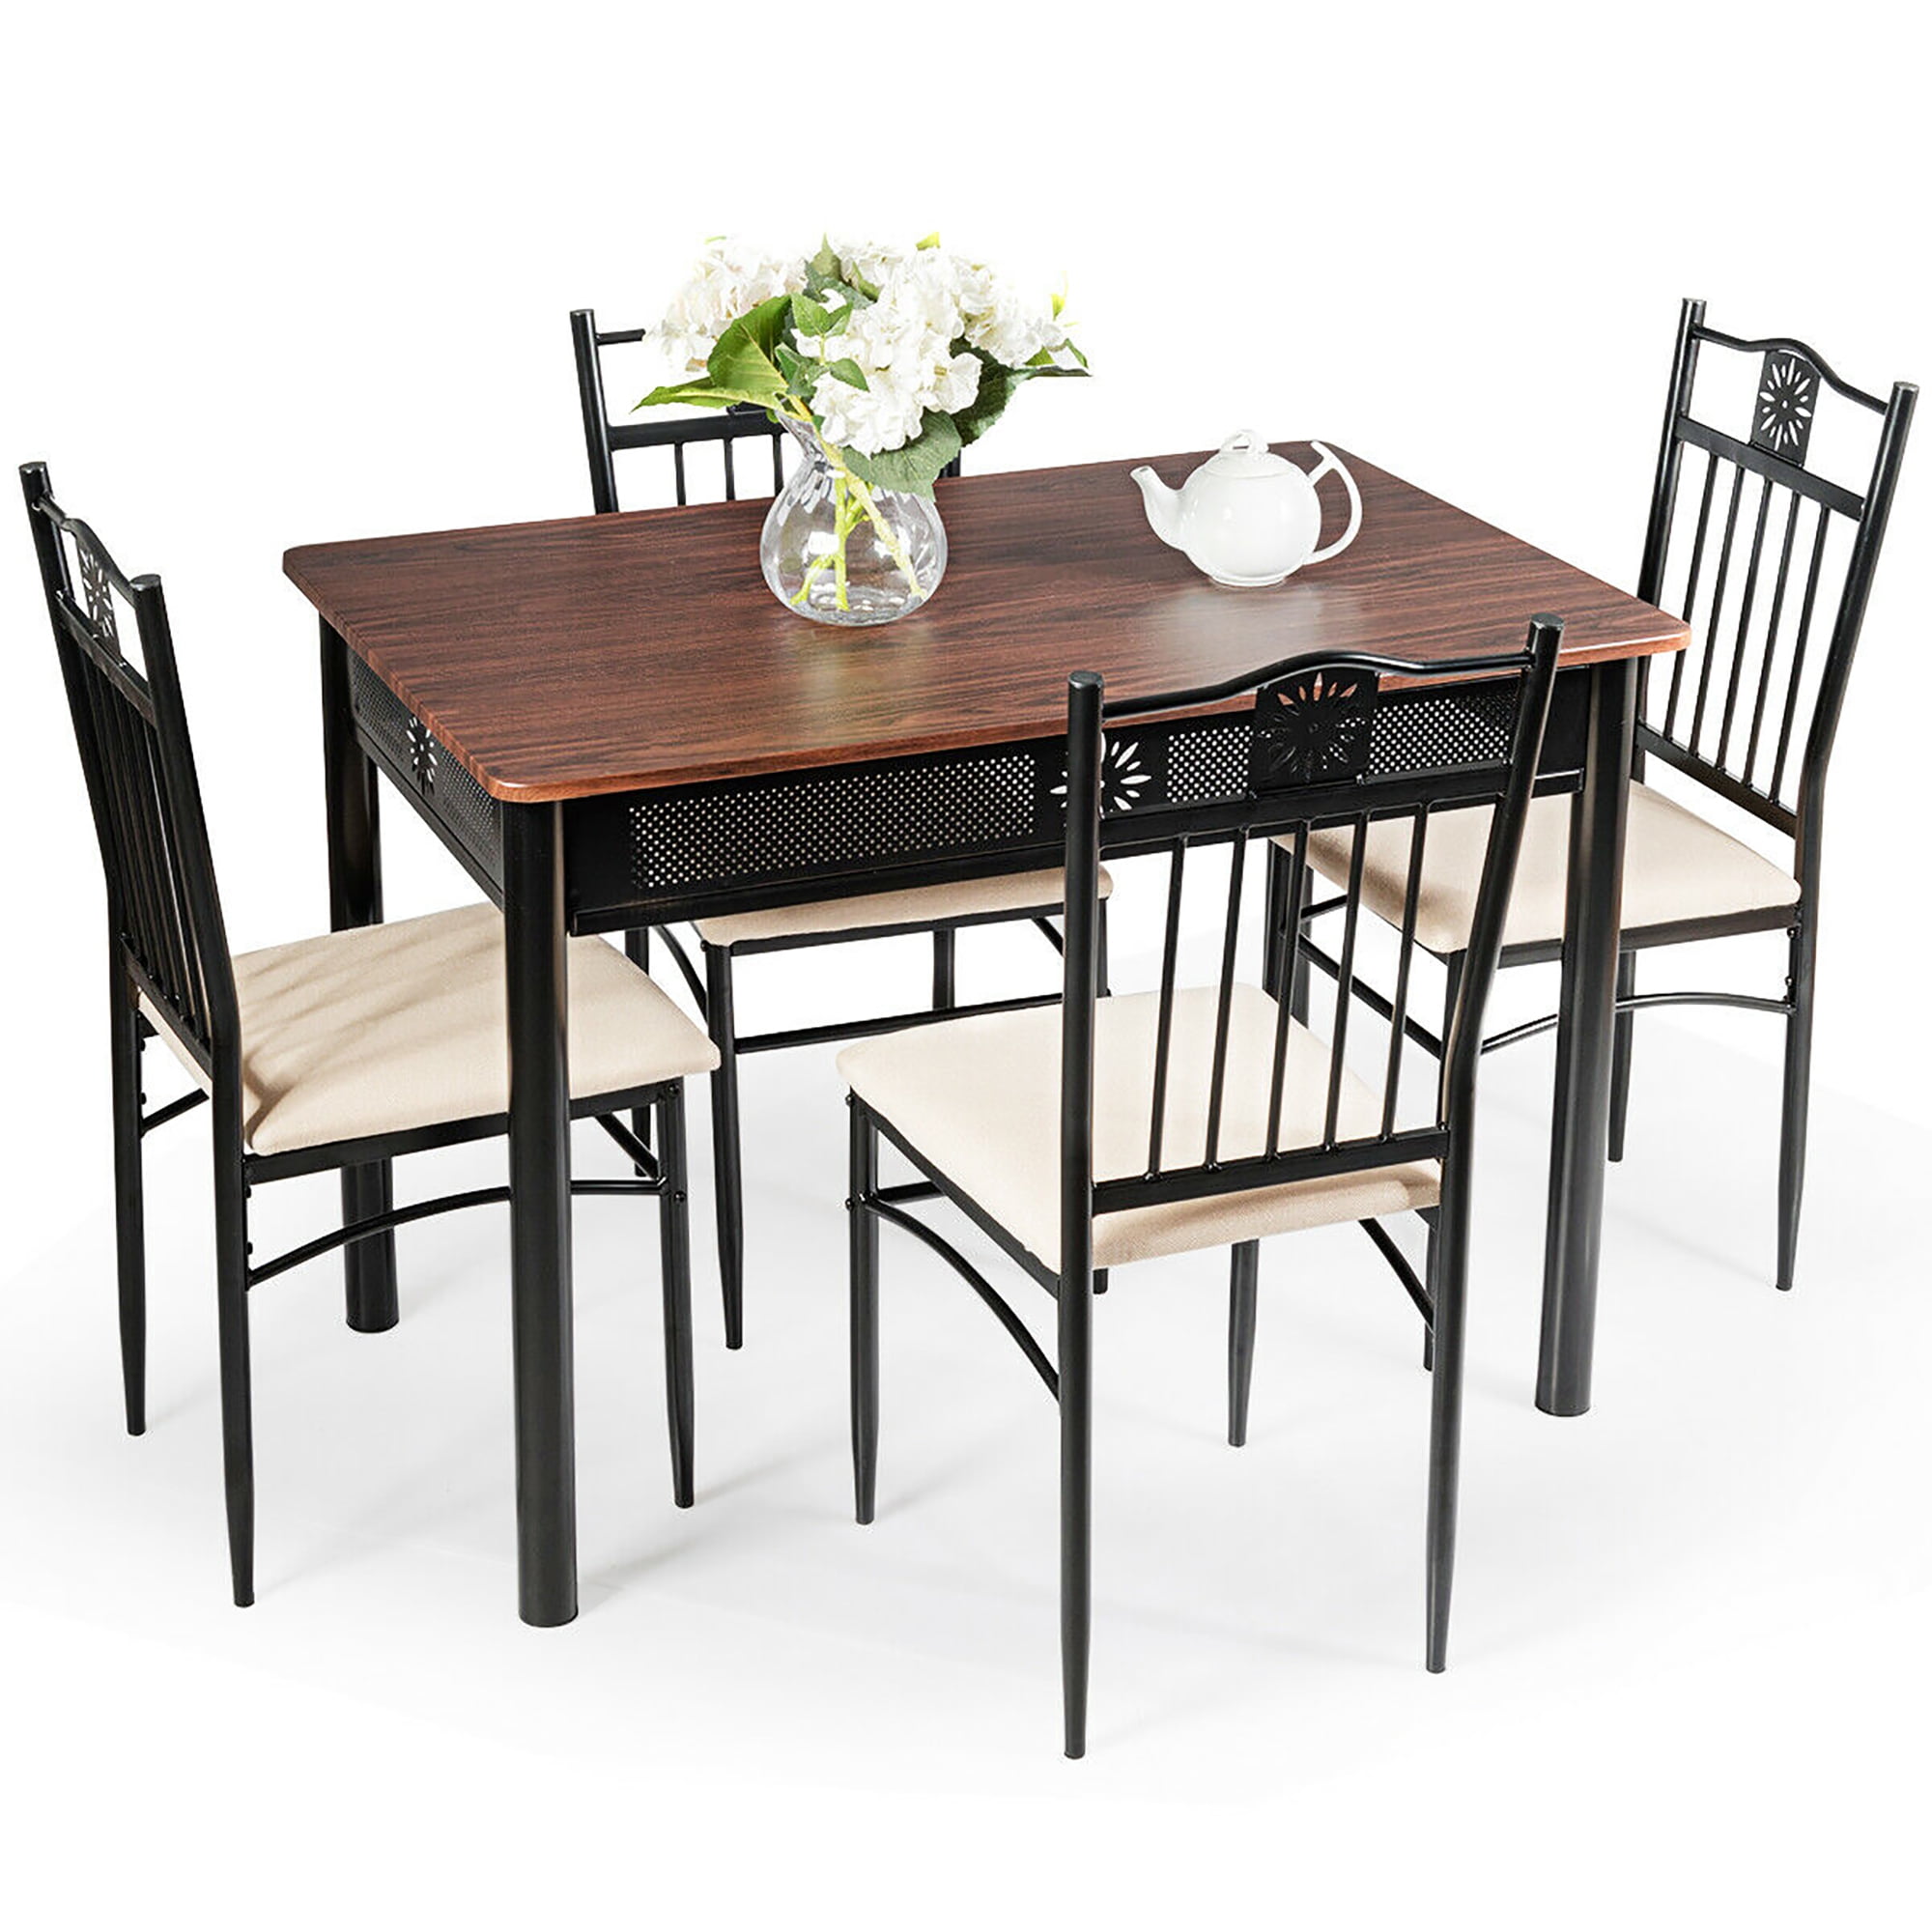 5X Wooden Metal Dining Table 4 Chairs Set Kitchen Breakfast Dinner Furniture Hot 